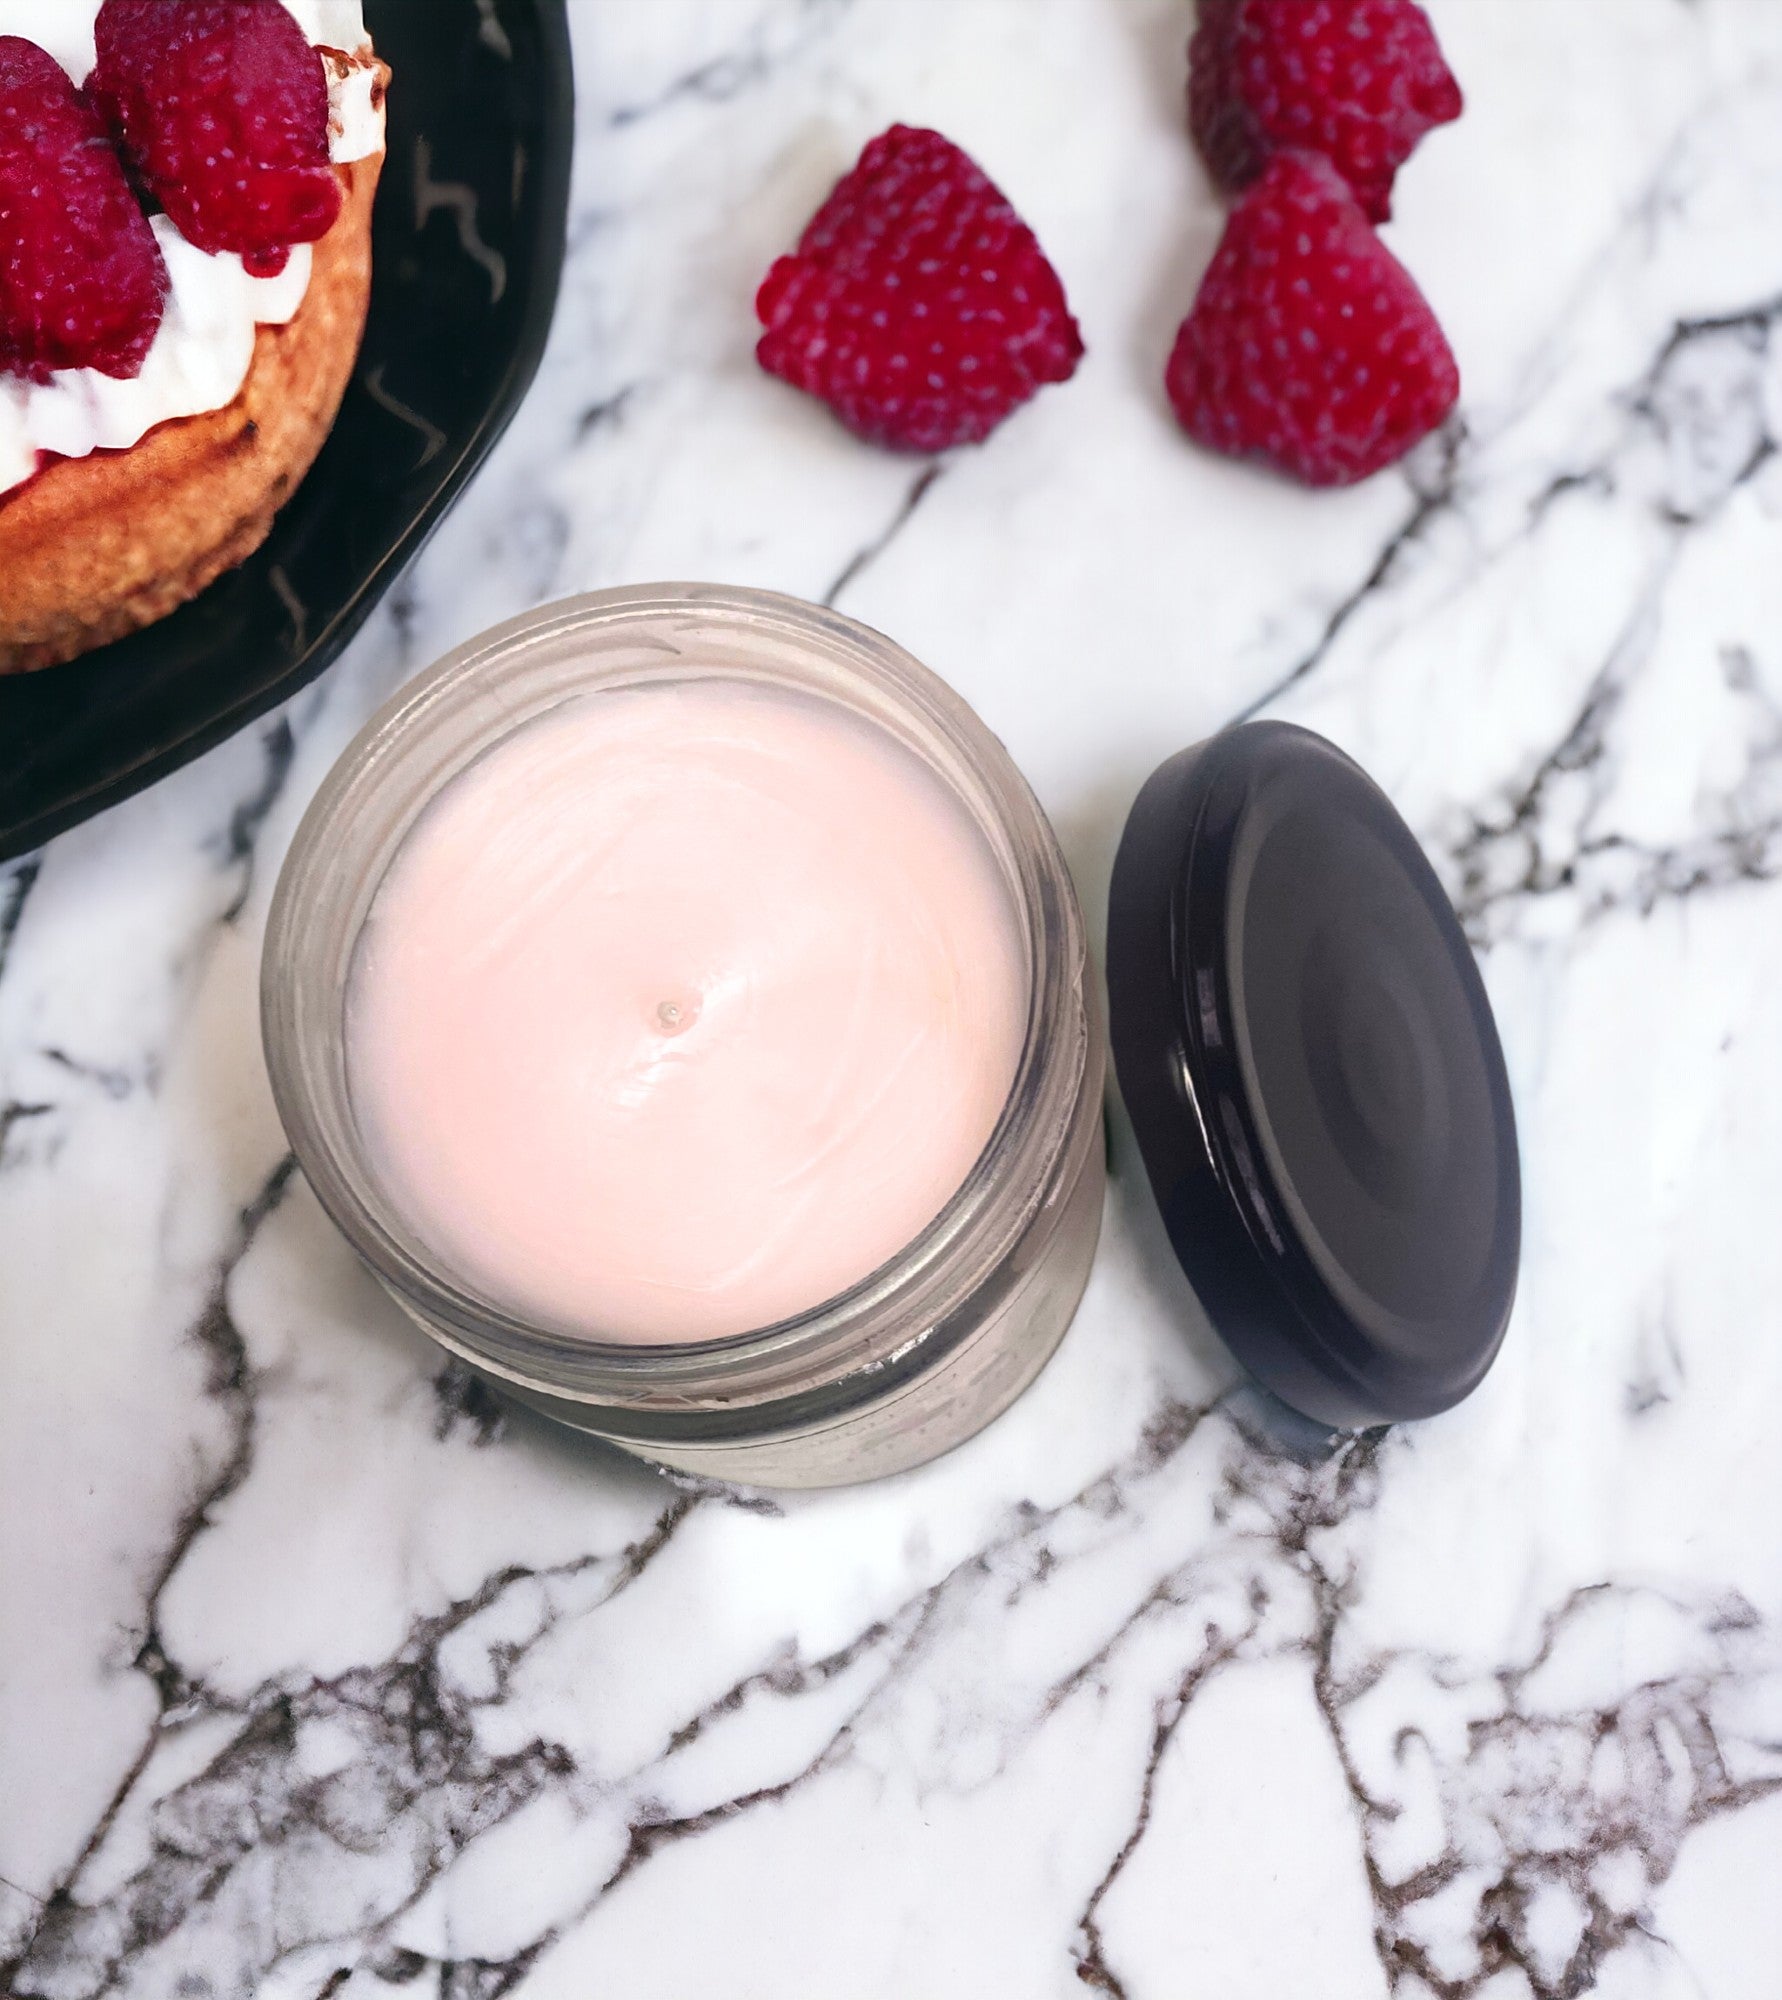 Indulge in the luscious scent of Raspberry Delight with this single wick, soy wax blend scented candle. Bursting with bright citrus, vanilla, and juicy raspberry, it's perfectly balanced with hints of fresh berries and a creamy buttery blissful dessert . Let this thoughtfully crafted accord transport you to a fruit-filled fantasy.